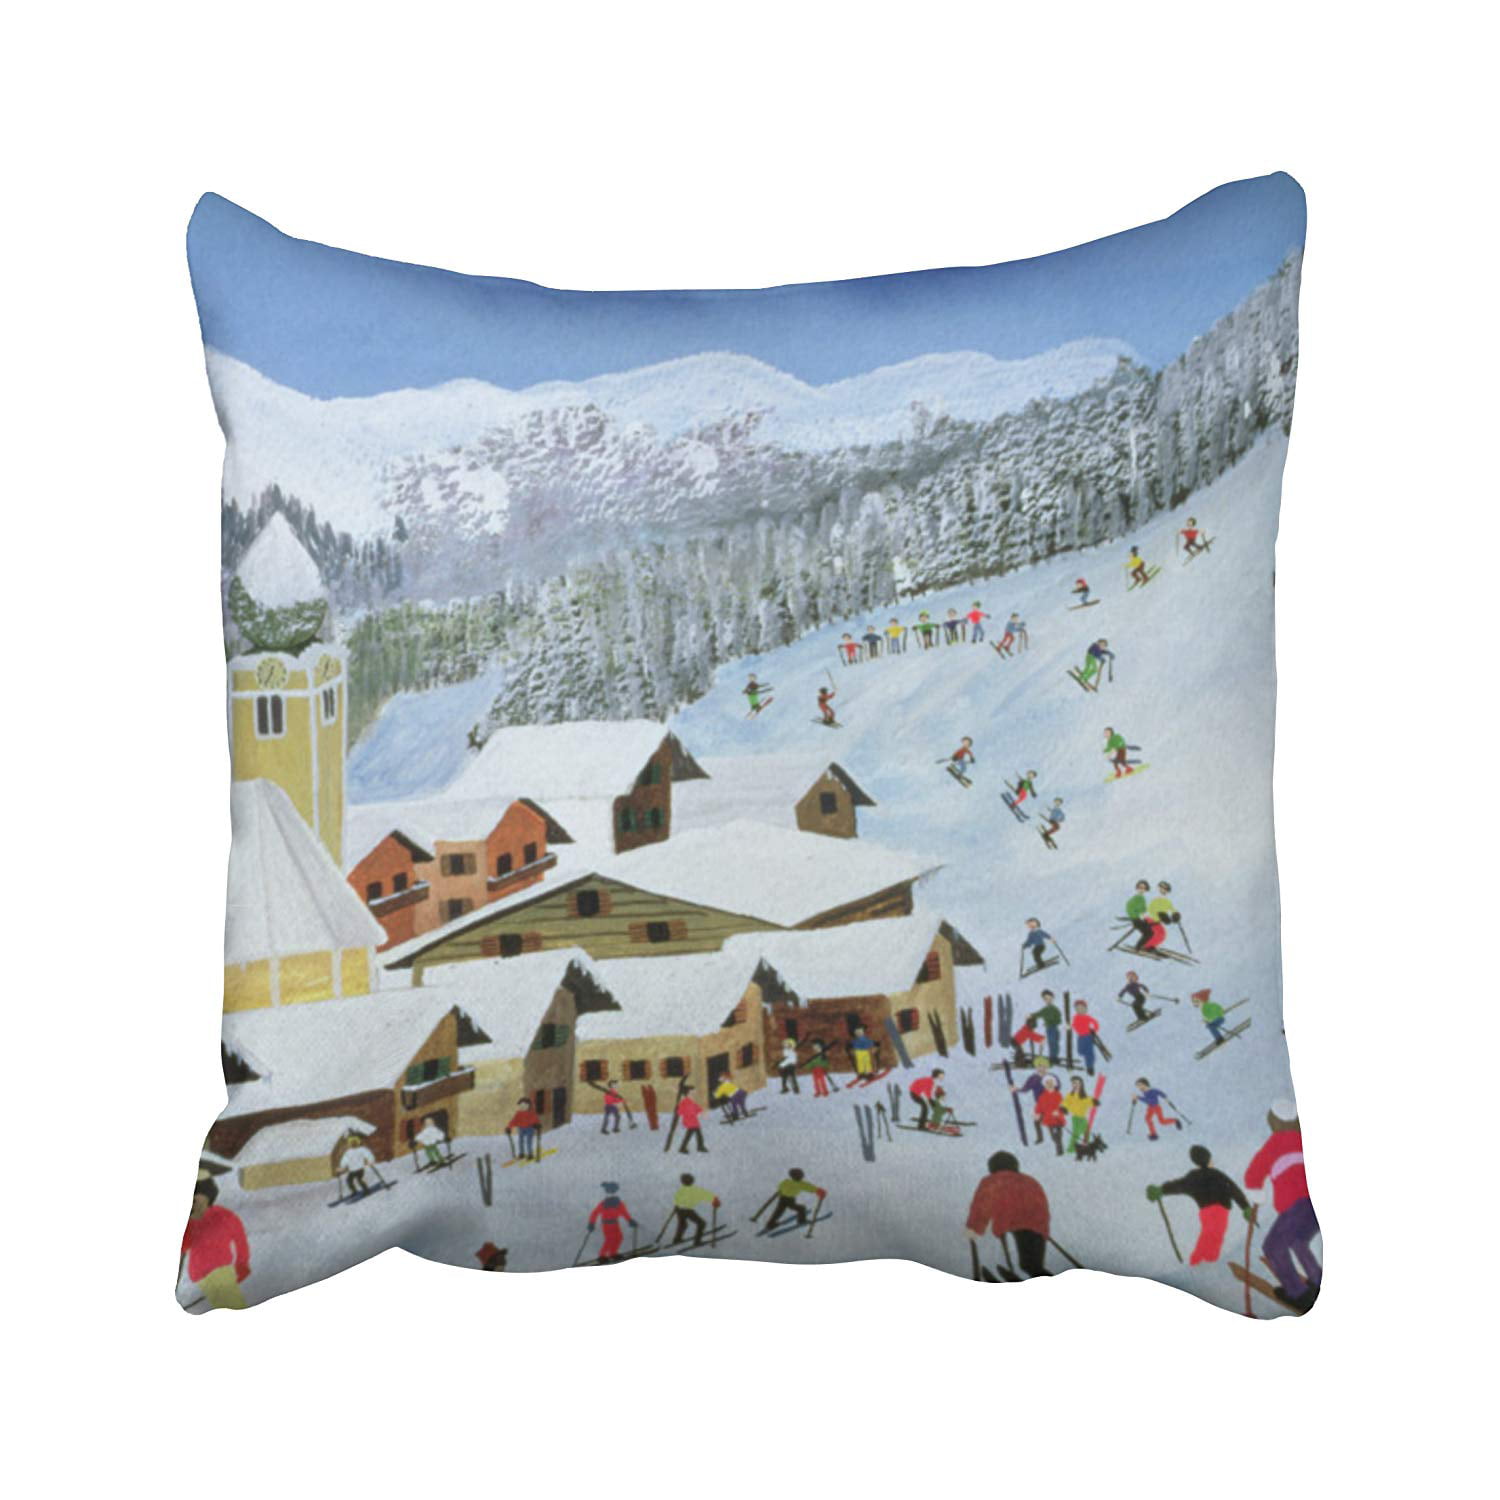 Snowboarder Ski Winter Sports Snowboarding Gift American Flag Snowboard Mountains Nature Athlete Sporty Throw Pillow Multicolor 18x18